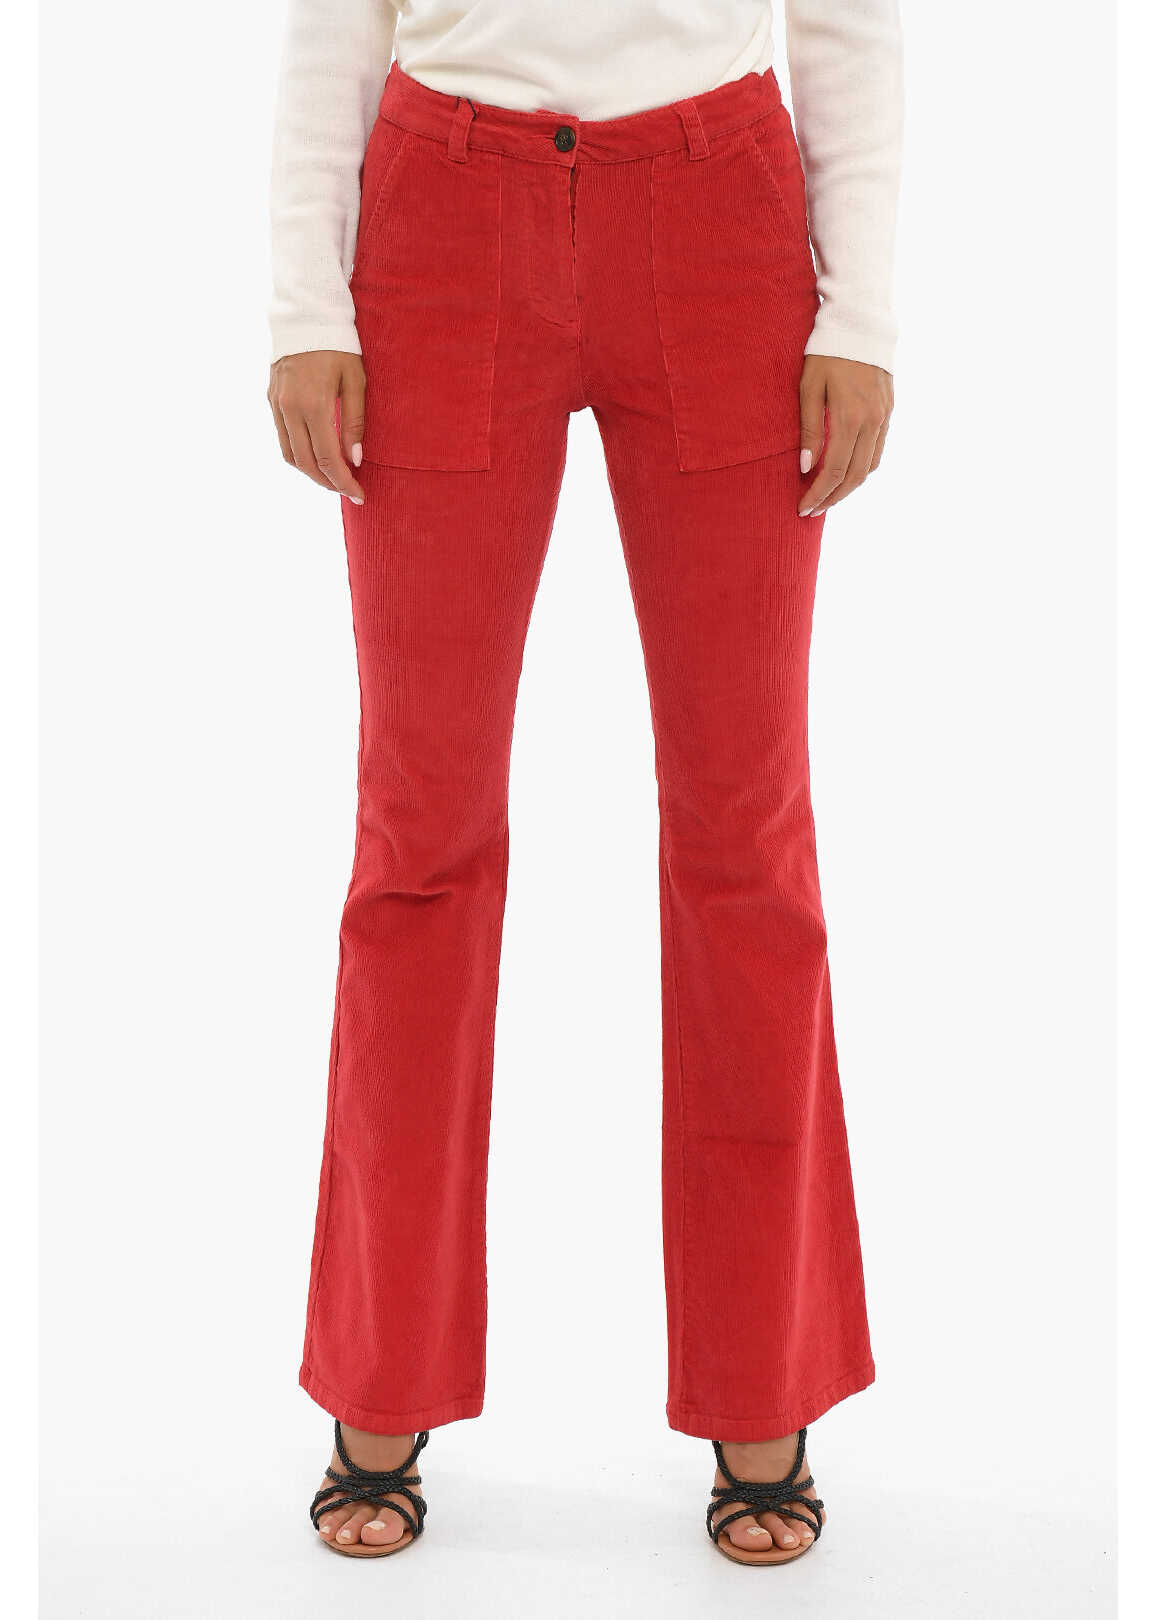 Woolrich Corduroy Bootcut Pants With Belt Loops Red